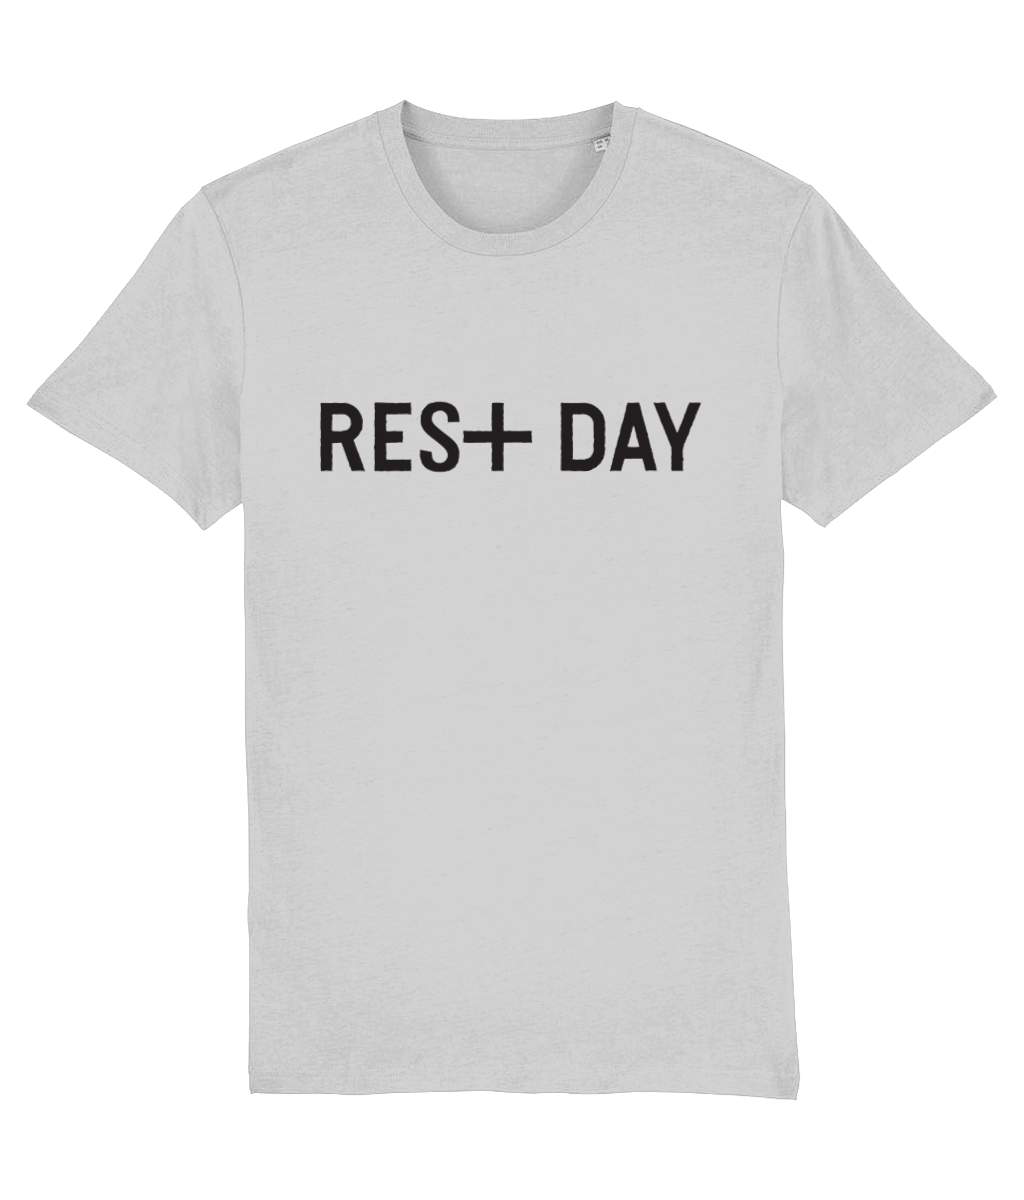 RES+ DAY Tee '21 in GREY - Crew Neck T-Shirt